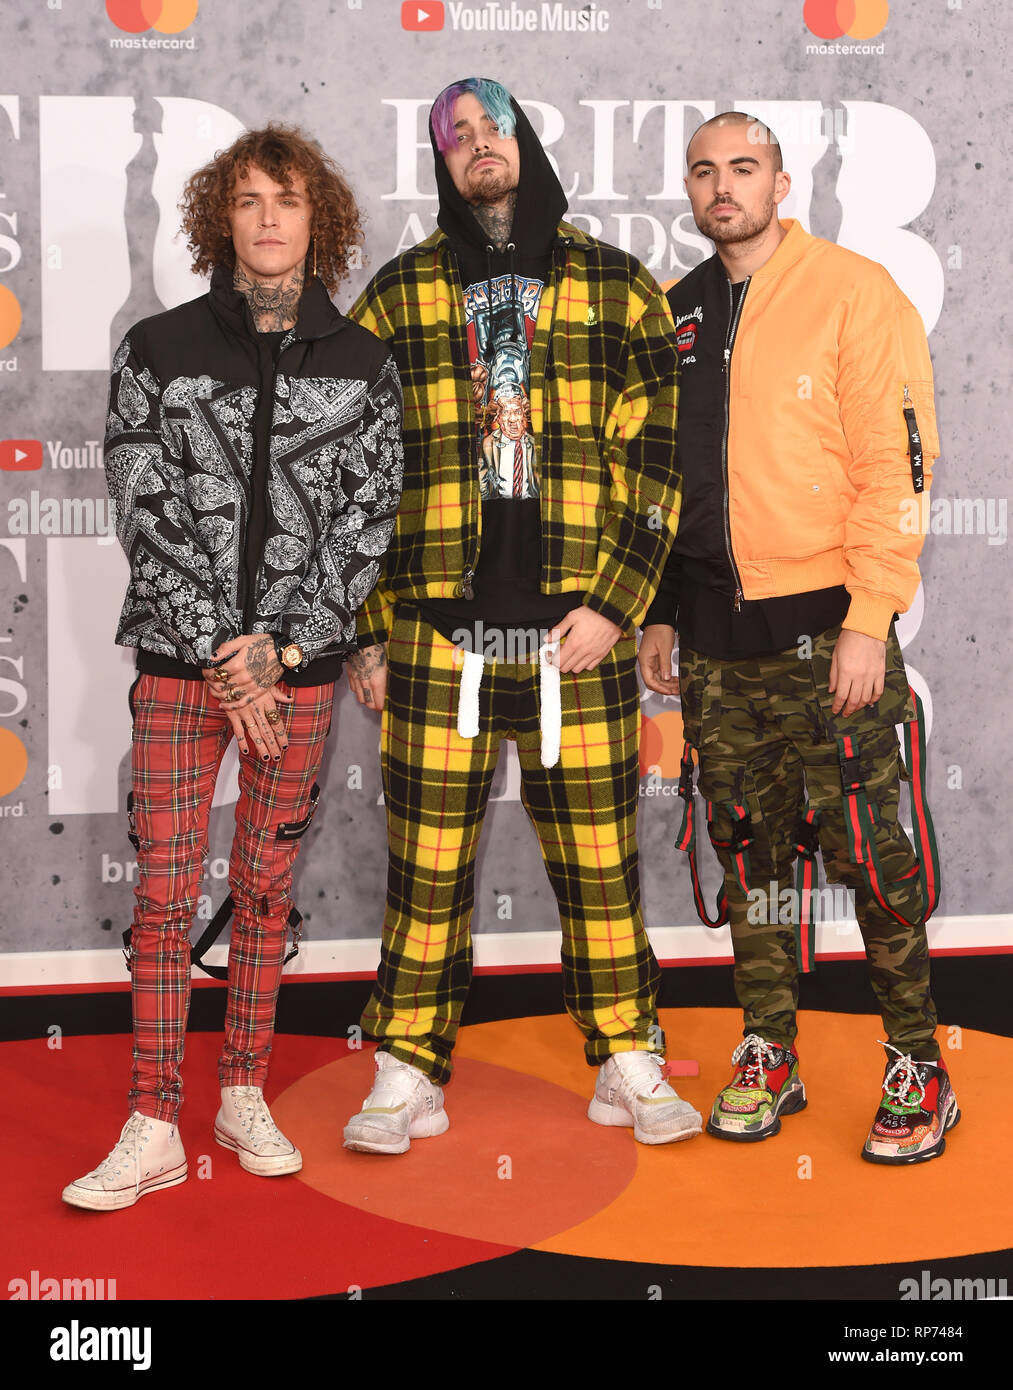 Photo Must Be Credited ©Alpha Press 079965 20/02/2019 Guest The Brit Awards 2019 at The O2 Arena London Stock Photo